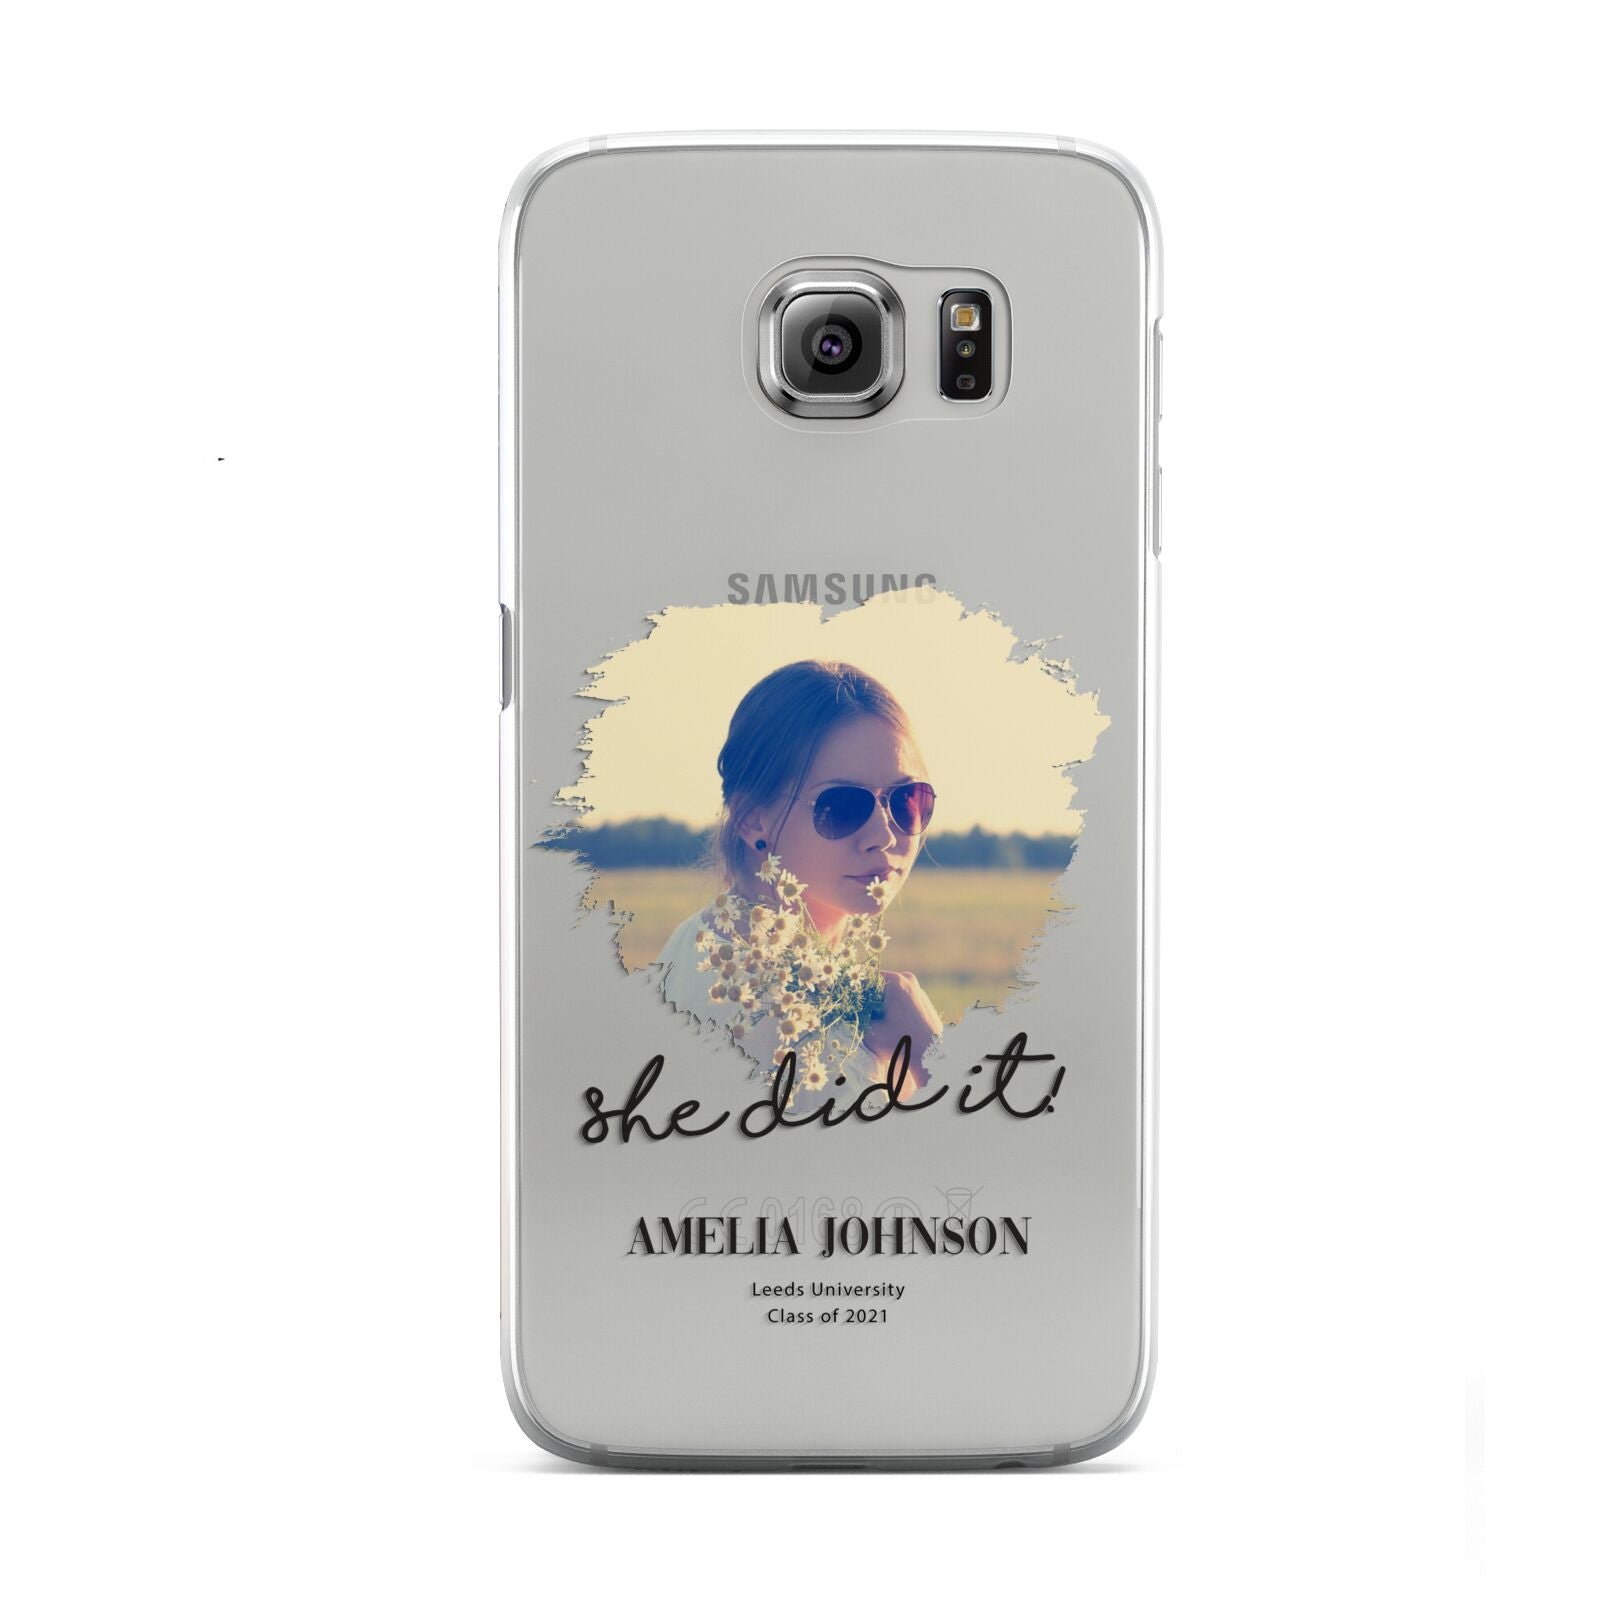 She Did It Graduation Photo with Name Samsung Galaxy S6 Case